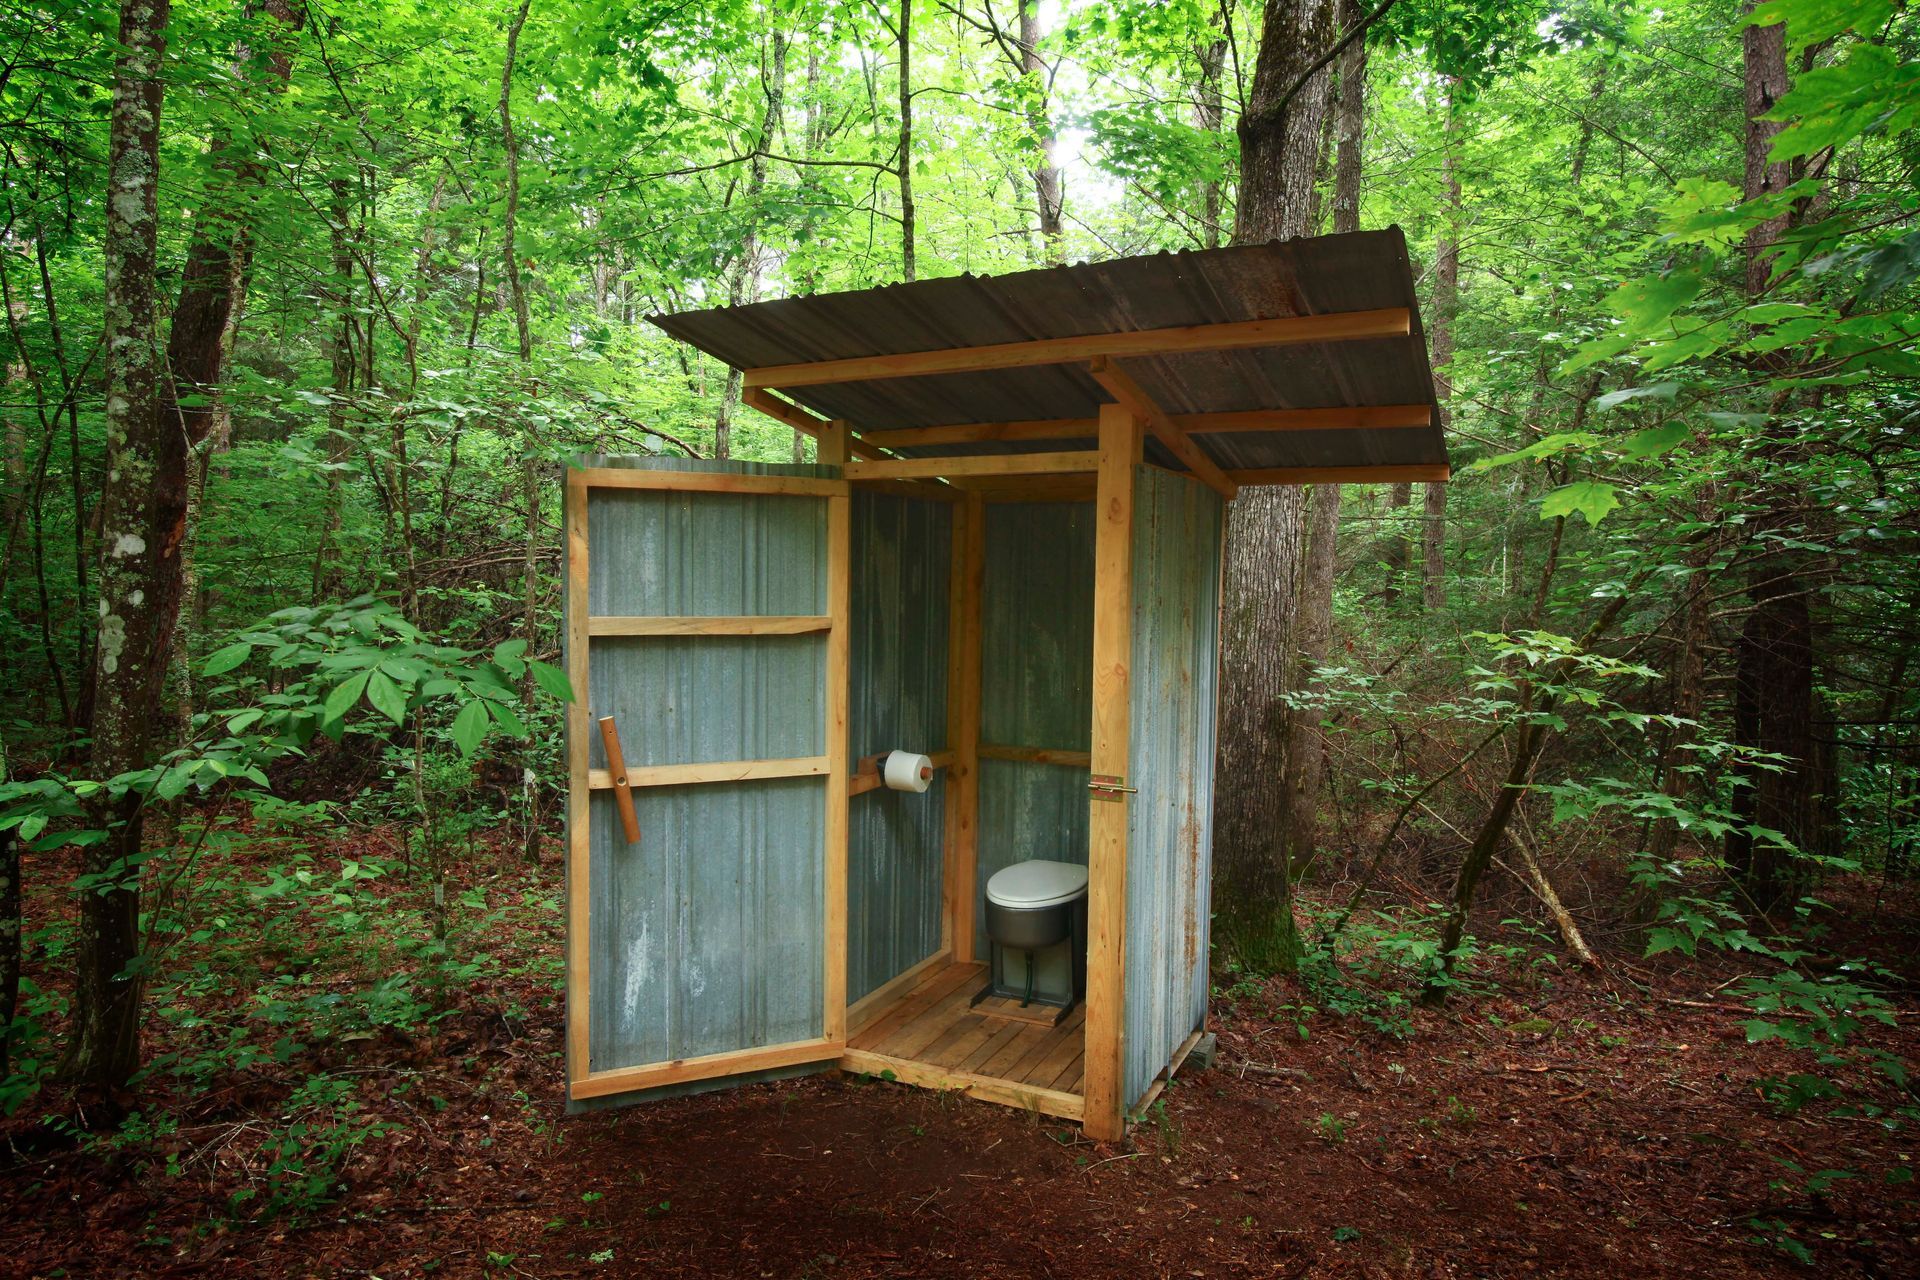 A small outhouse in the middle of a forest with the door open.